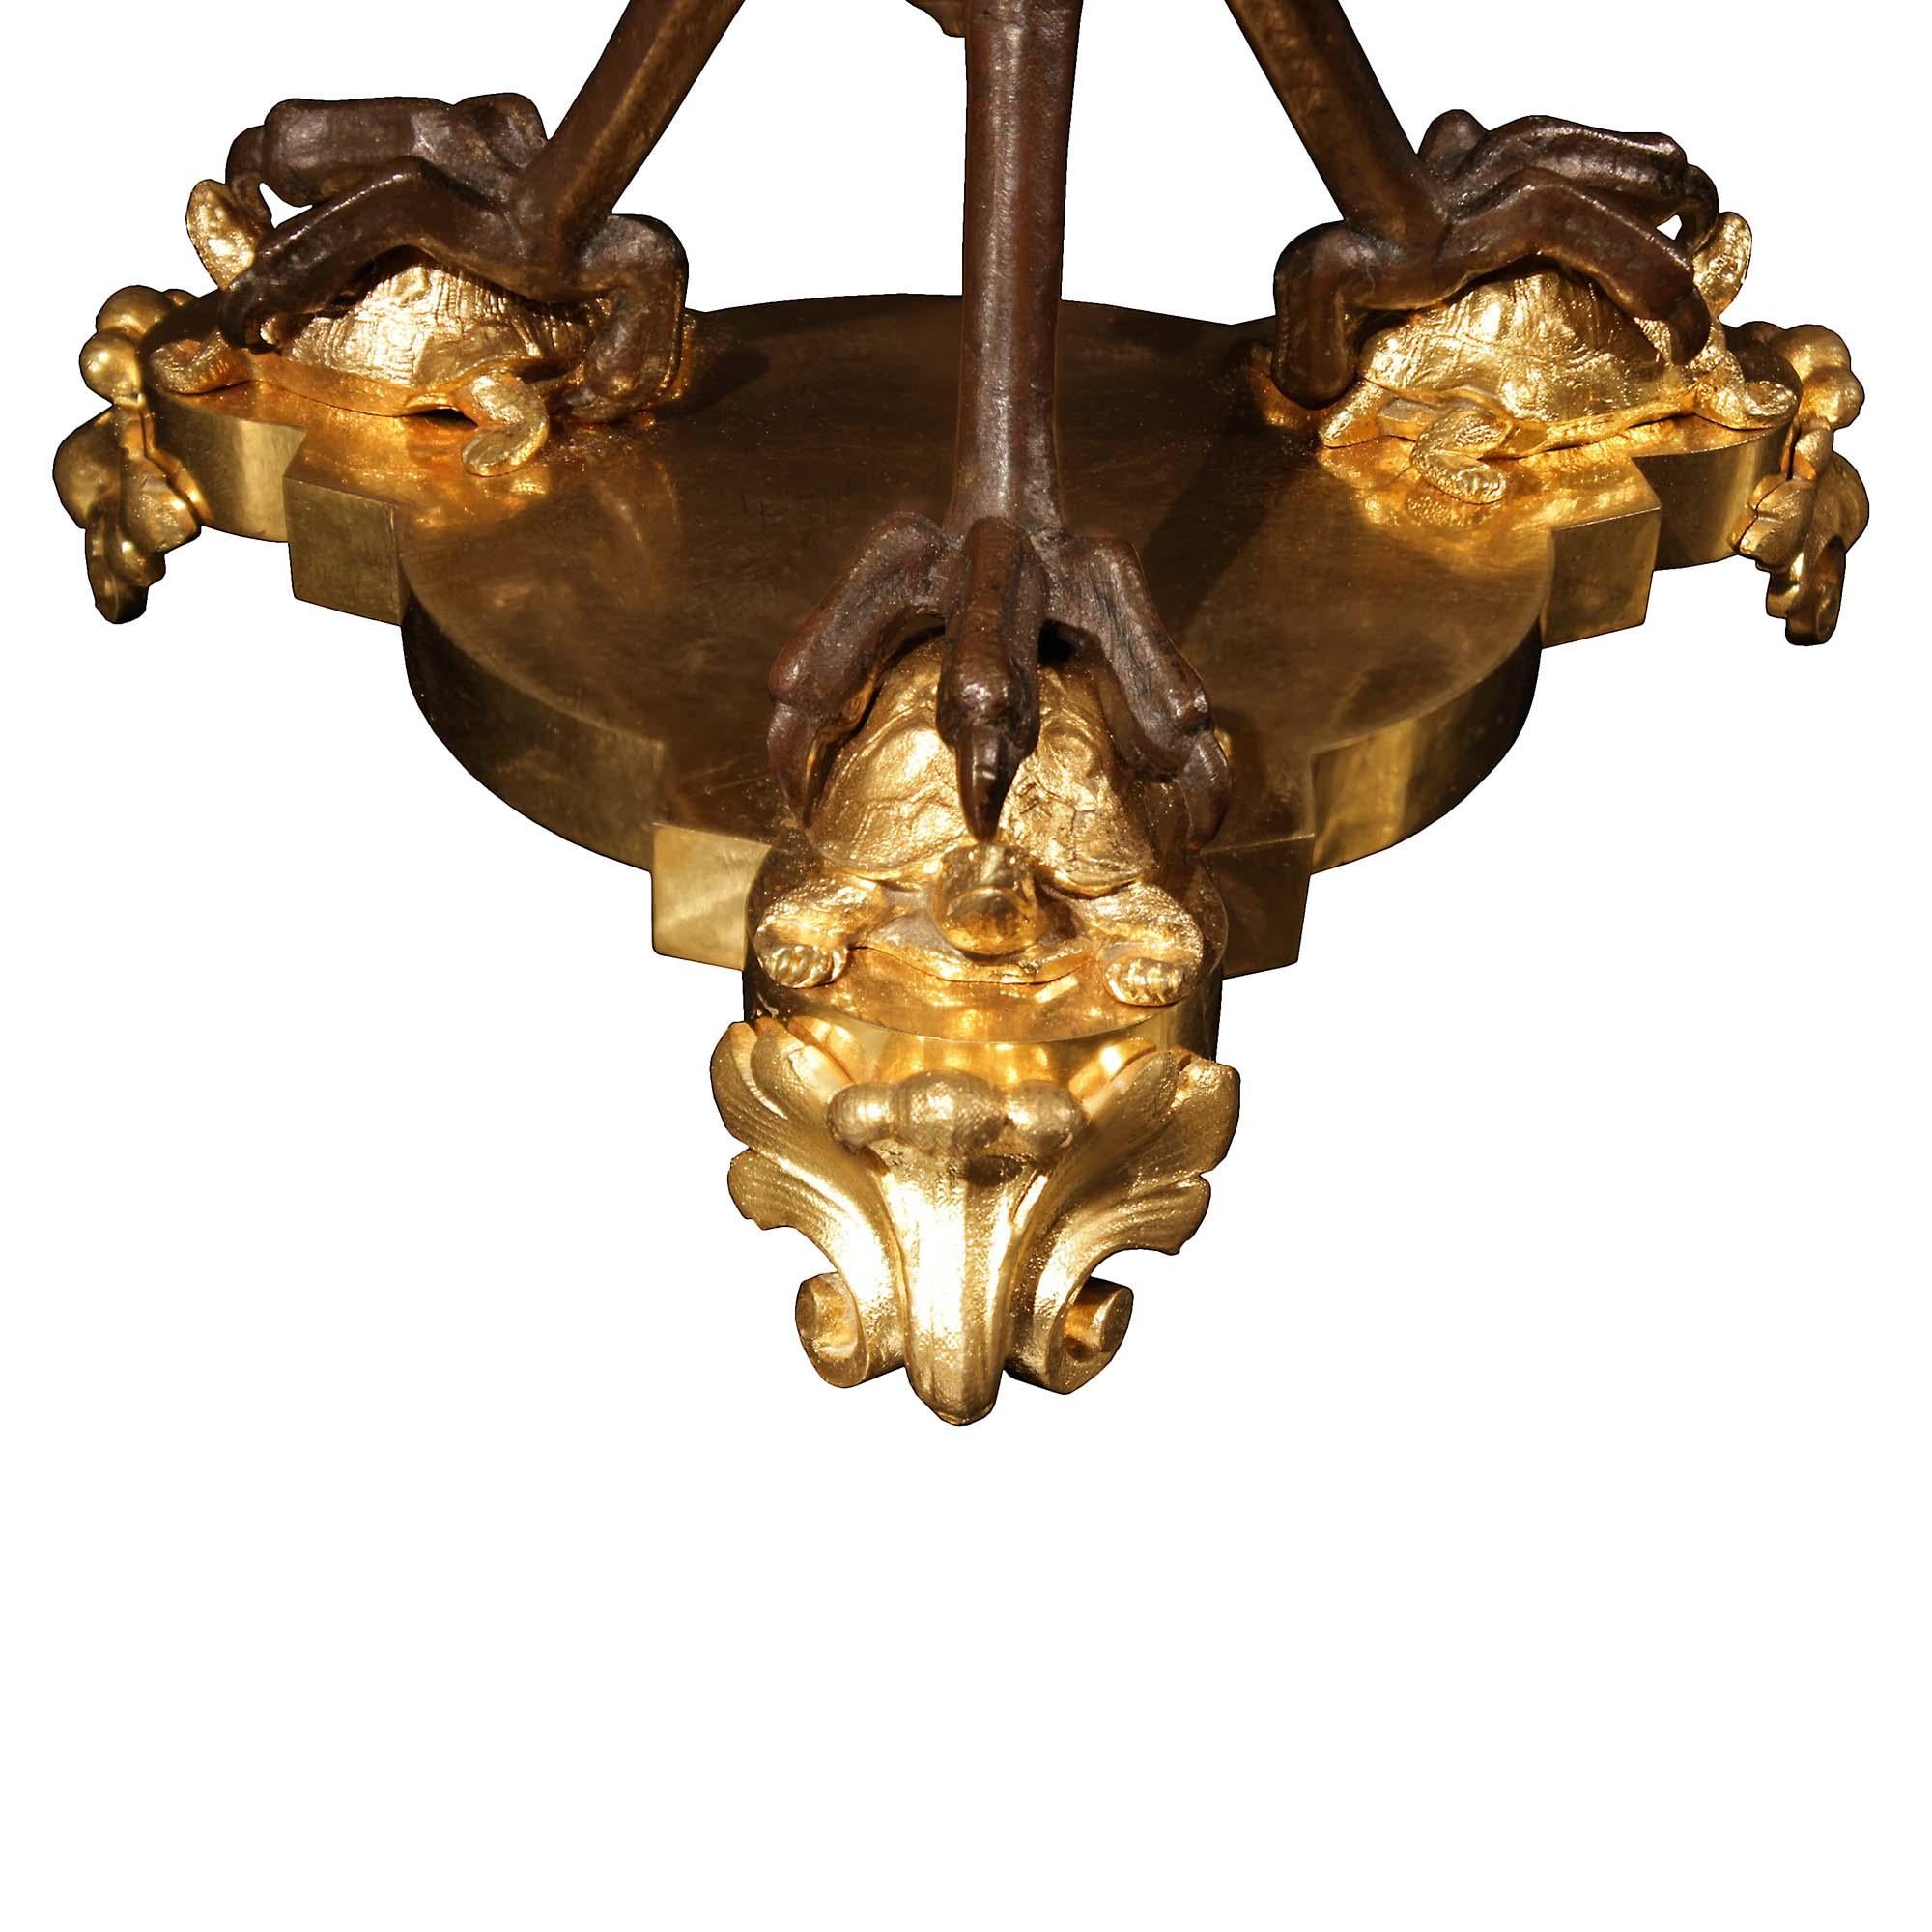 Pair of French 19th Century Neoclassical Style Bronze and Ormolu Candelabras 2